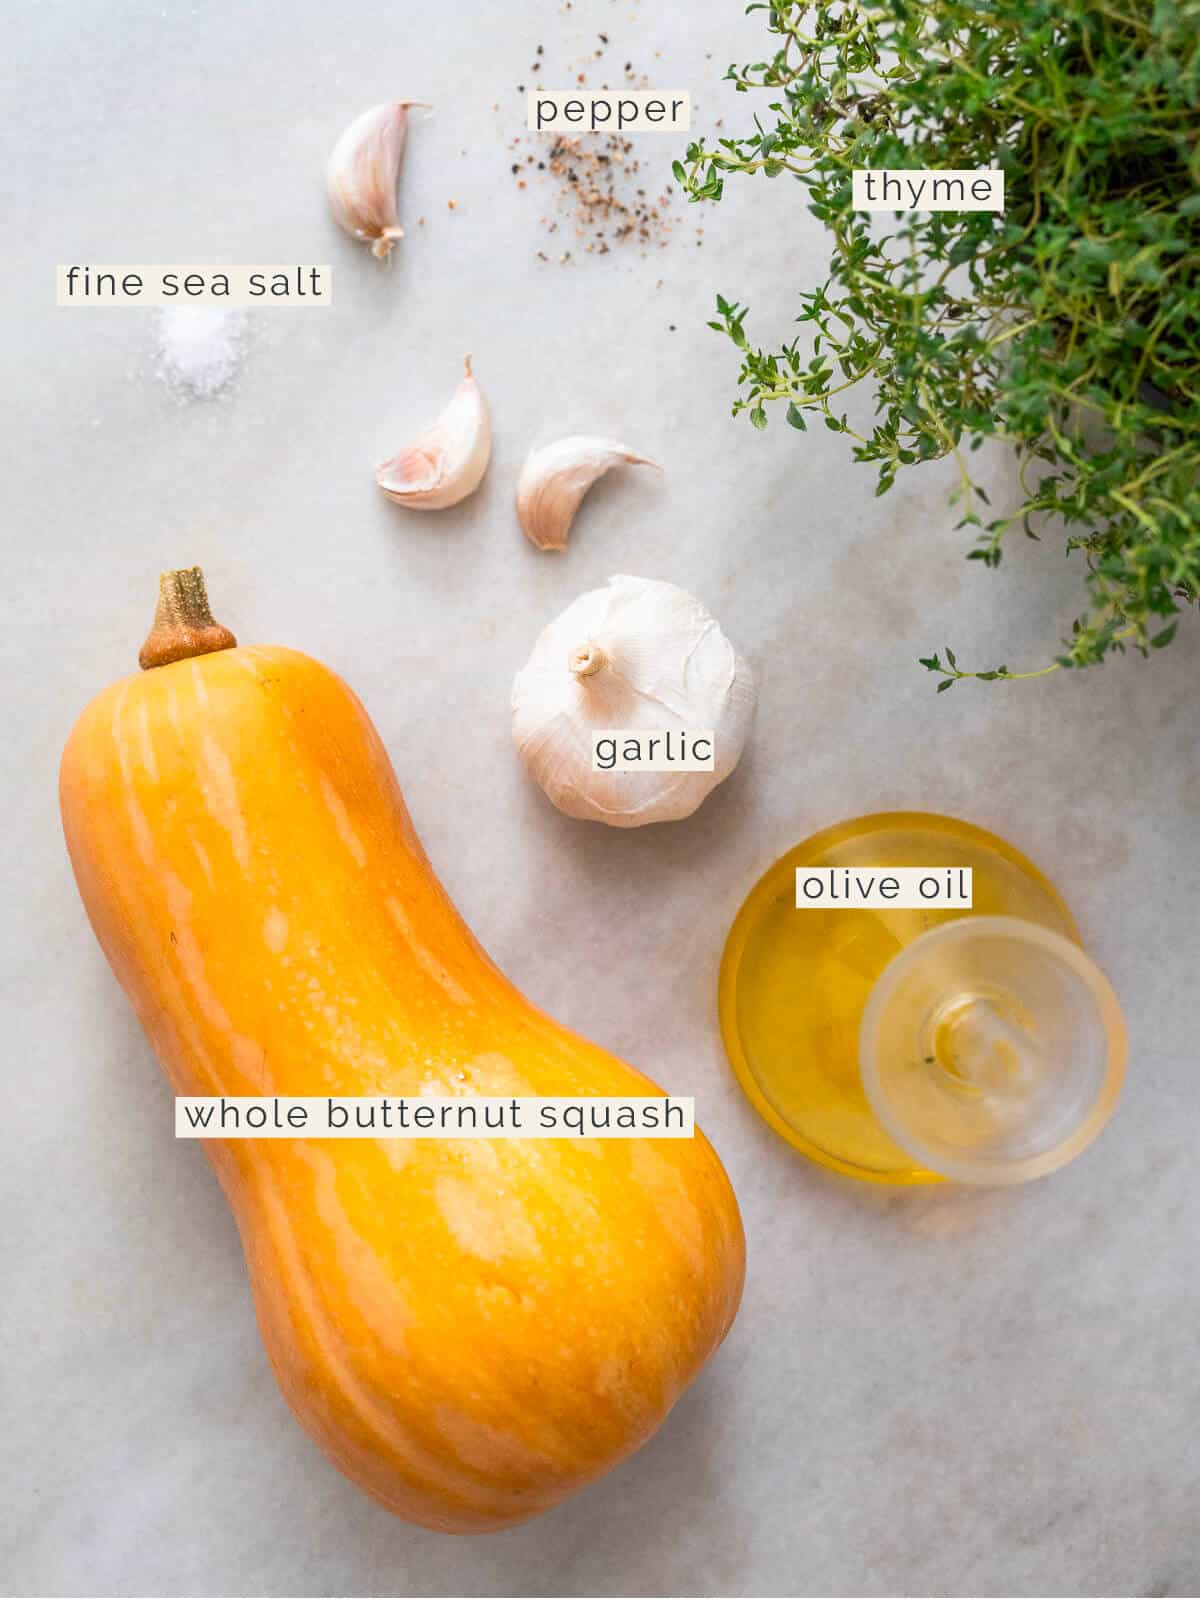 whole roasted butternut squash ingredients.